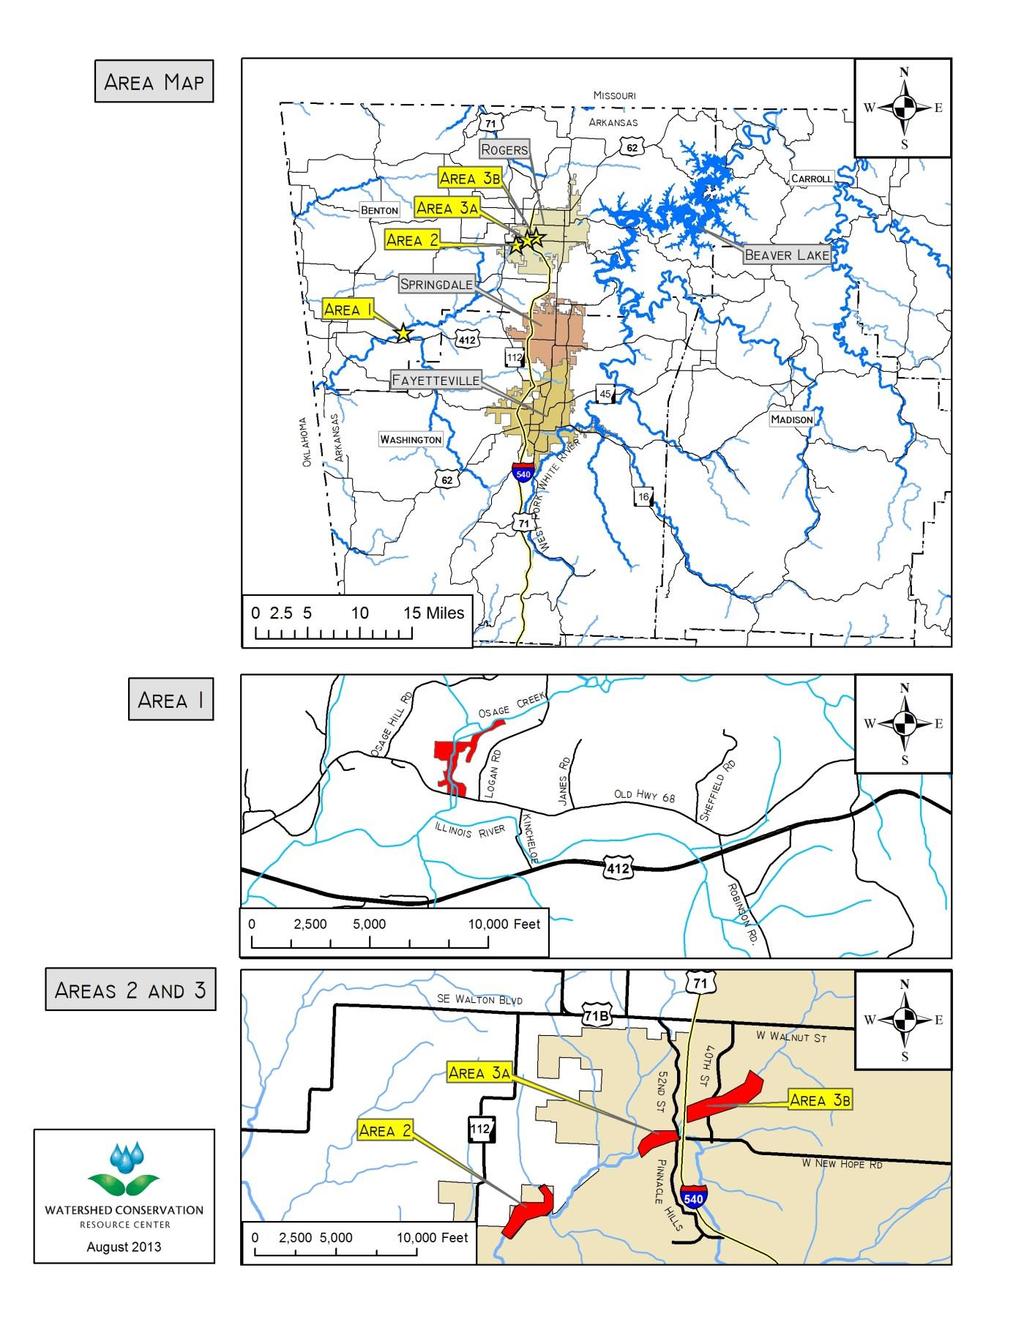 Figure 2 Location of proposed Osage Creek Mitigation Banks Areas 1, 2, and 3 in relation to the regional area and local vicinity A-2 Osage